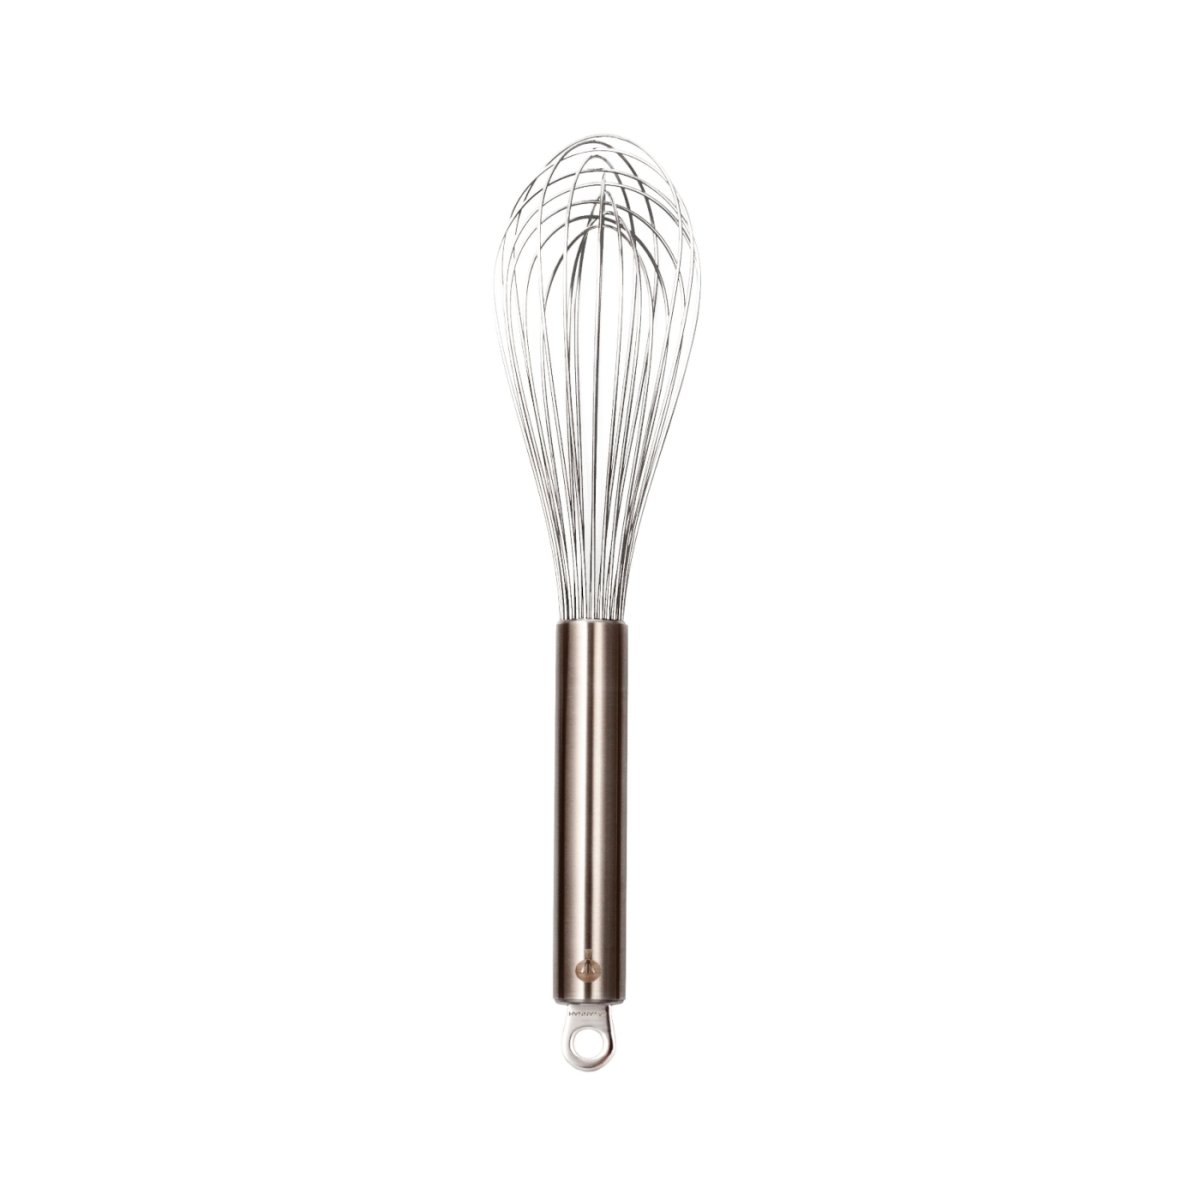 Stainless Steel Whisk 12" - Minimax